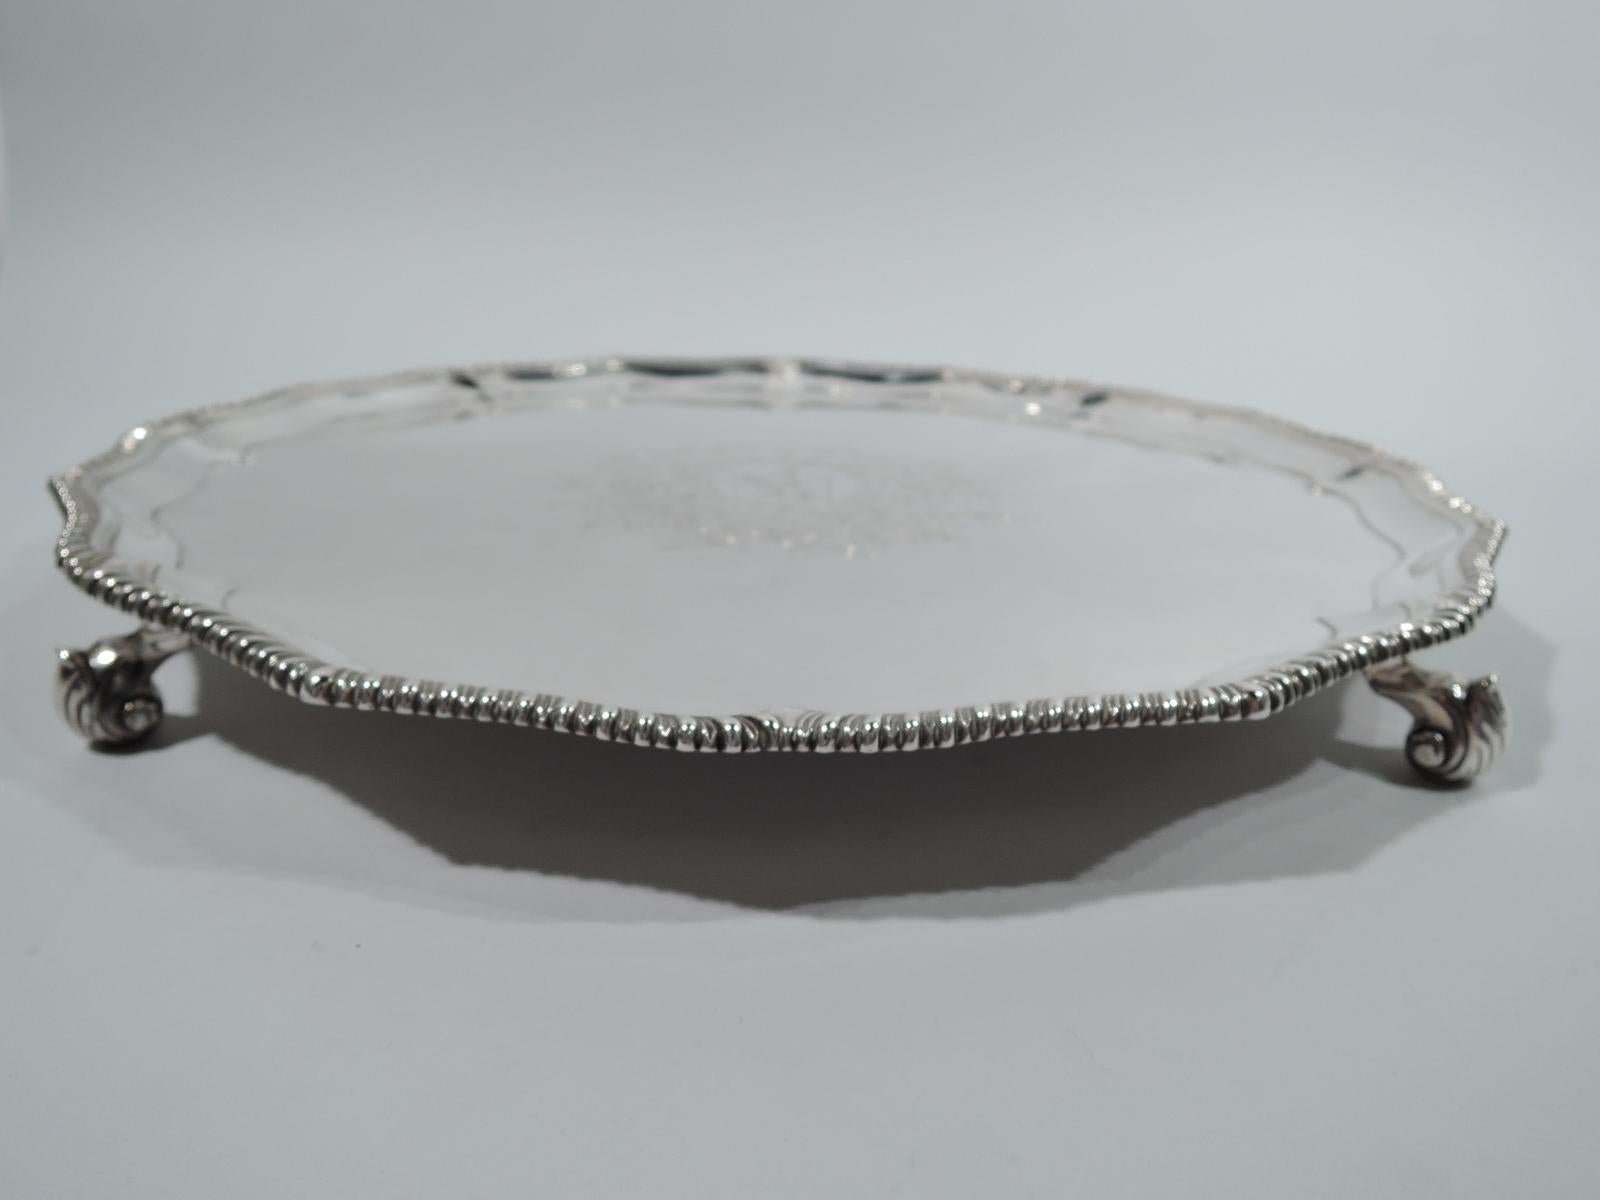 George III sterling silver salver. Made by Robert Rew in London in 1769. Round and ogee well with engraved armorial in floral surround. Sides tapering, and rim scrolled and gadrooned. Four leaf-capped volute scrolls. Stylish midcentury Georgian.